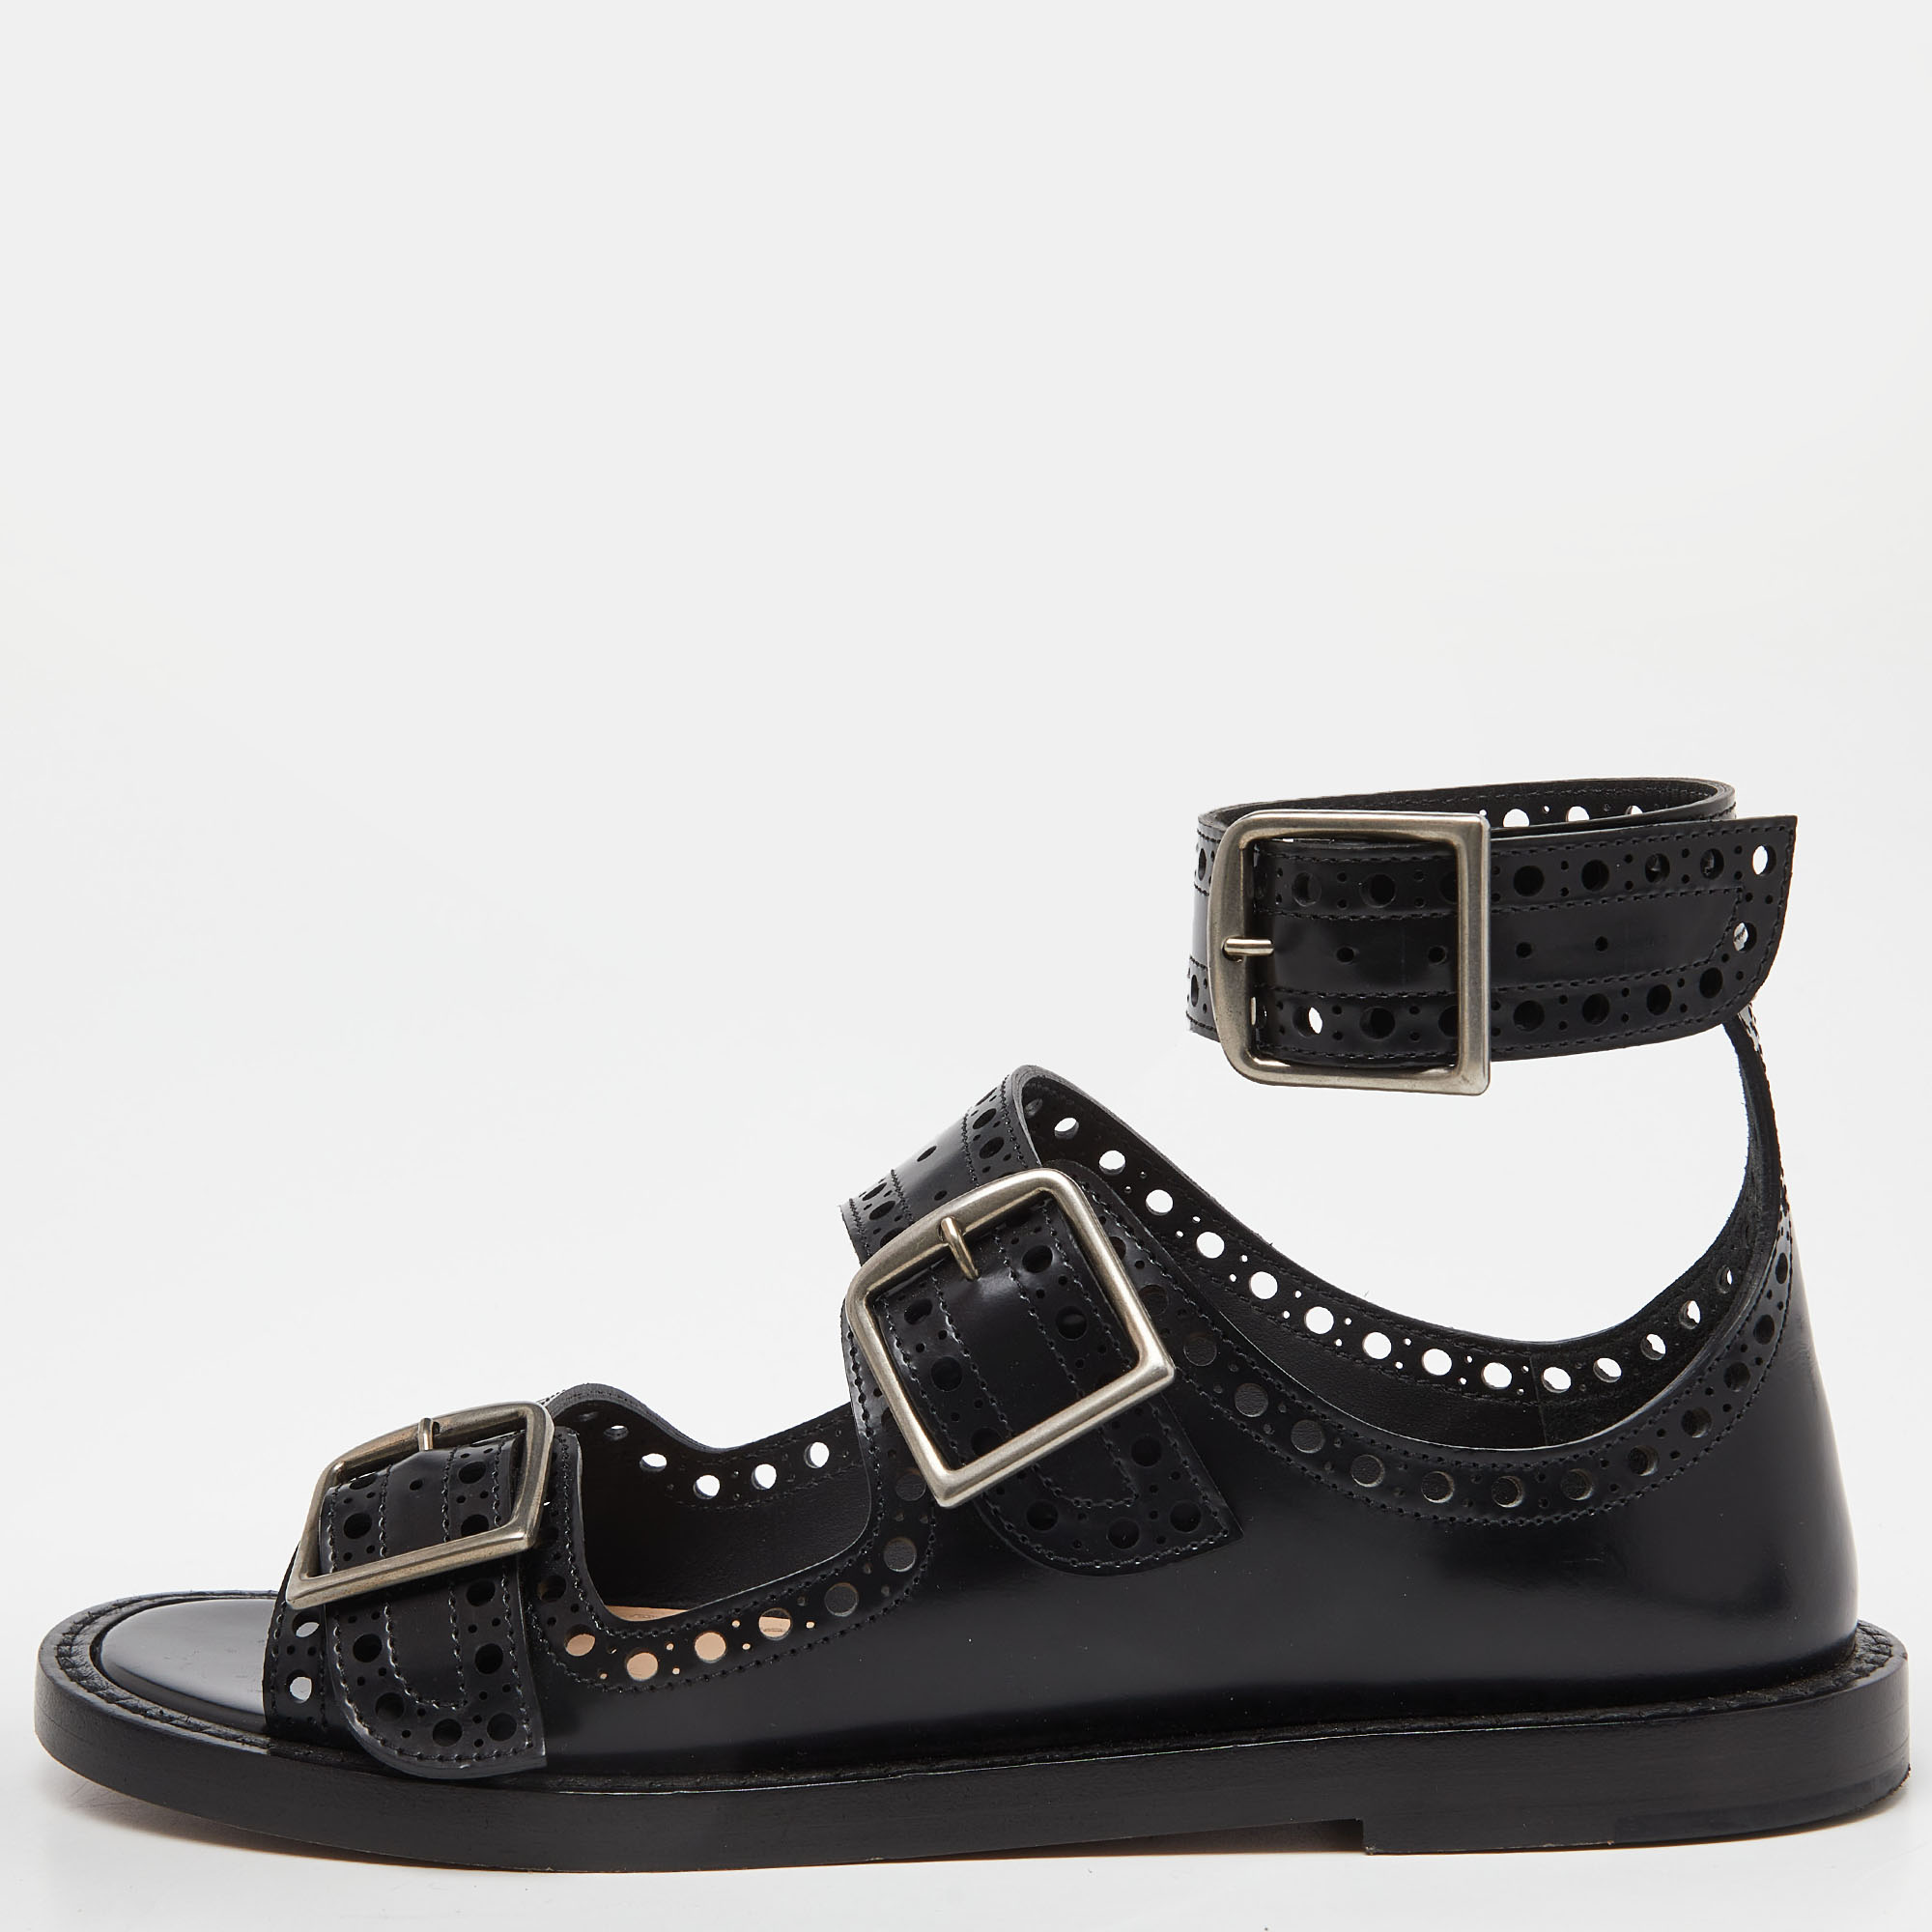 Dior black perforated leather teddy d buckles flat sandals size 34